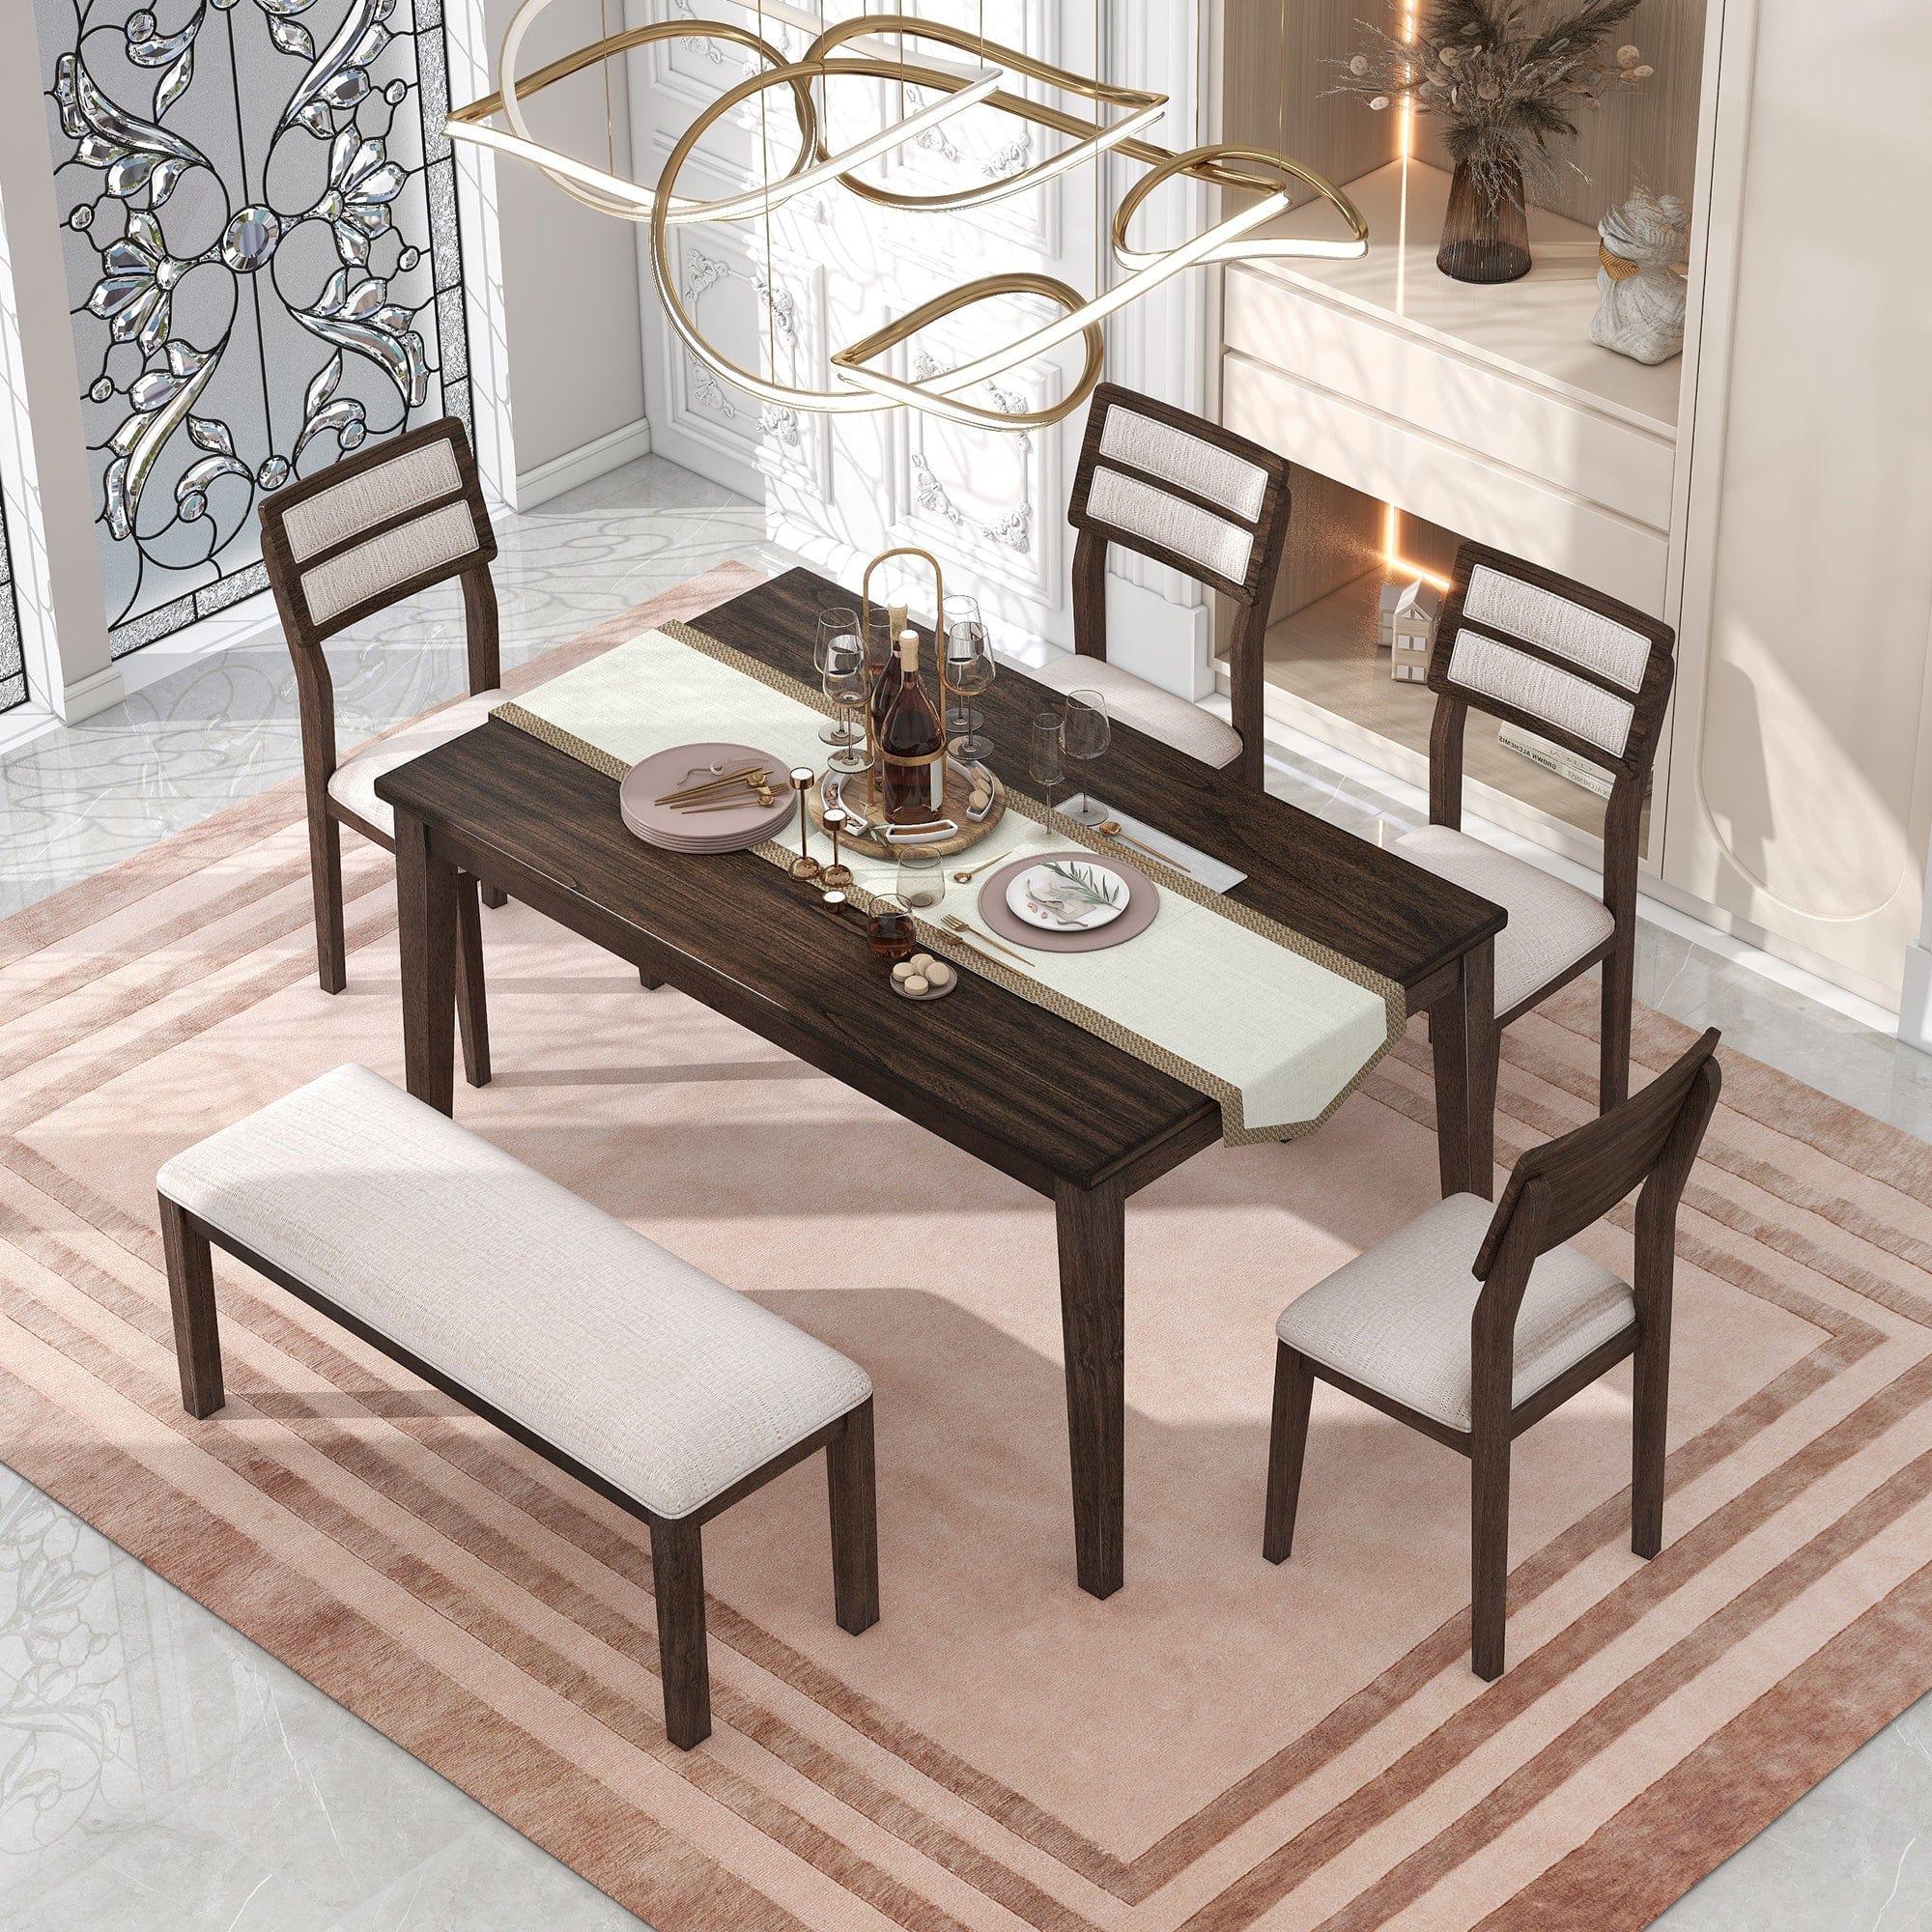 Shop TREXM Classic and Traditional Style 6 - Piece Dining Set, Includes Dining Table, 4 Upholstered Chairs & Bench (Espresso) Mademoiselle Home Decor